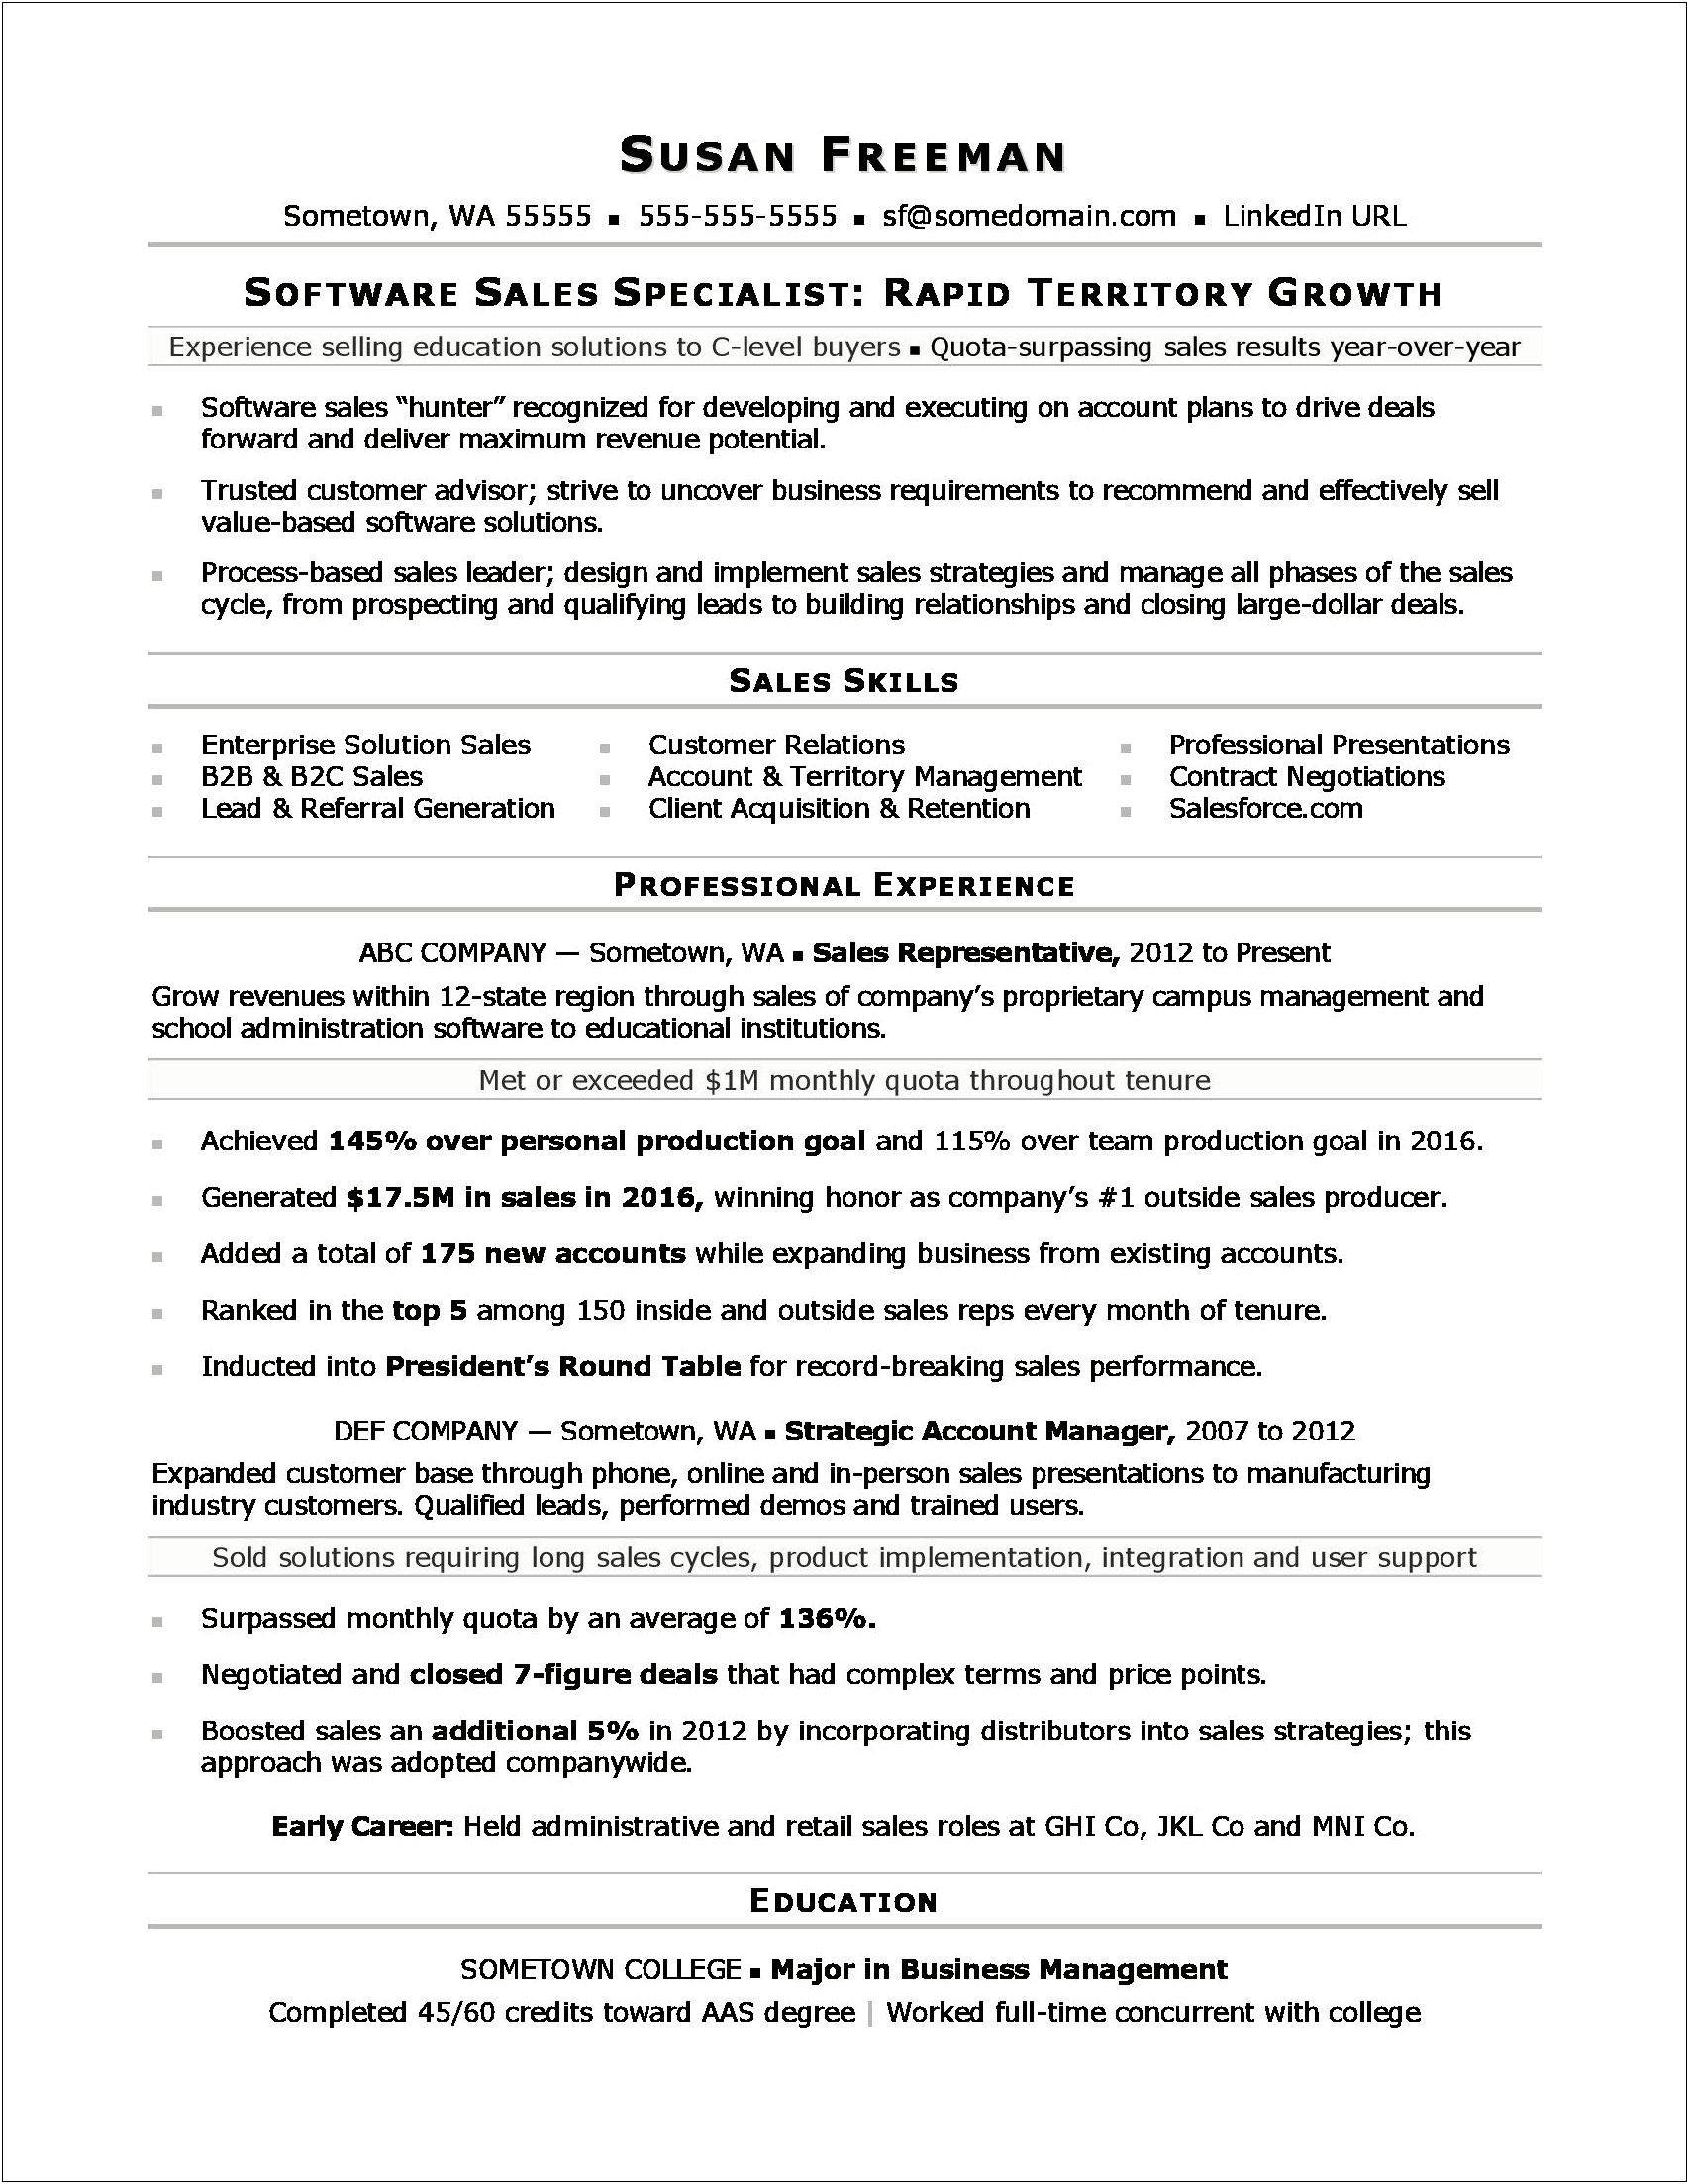 Objectives In Retail Job Resume Template